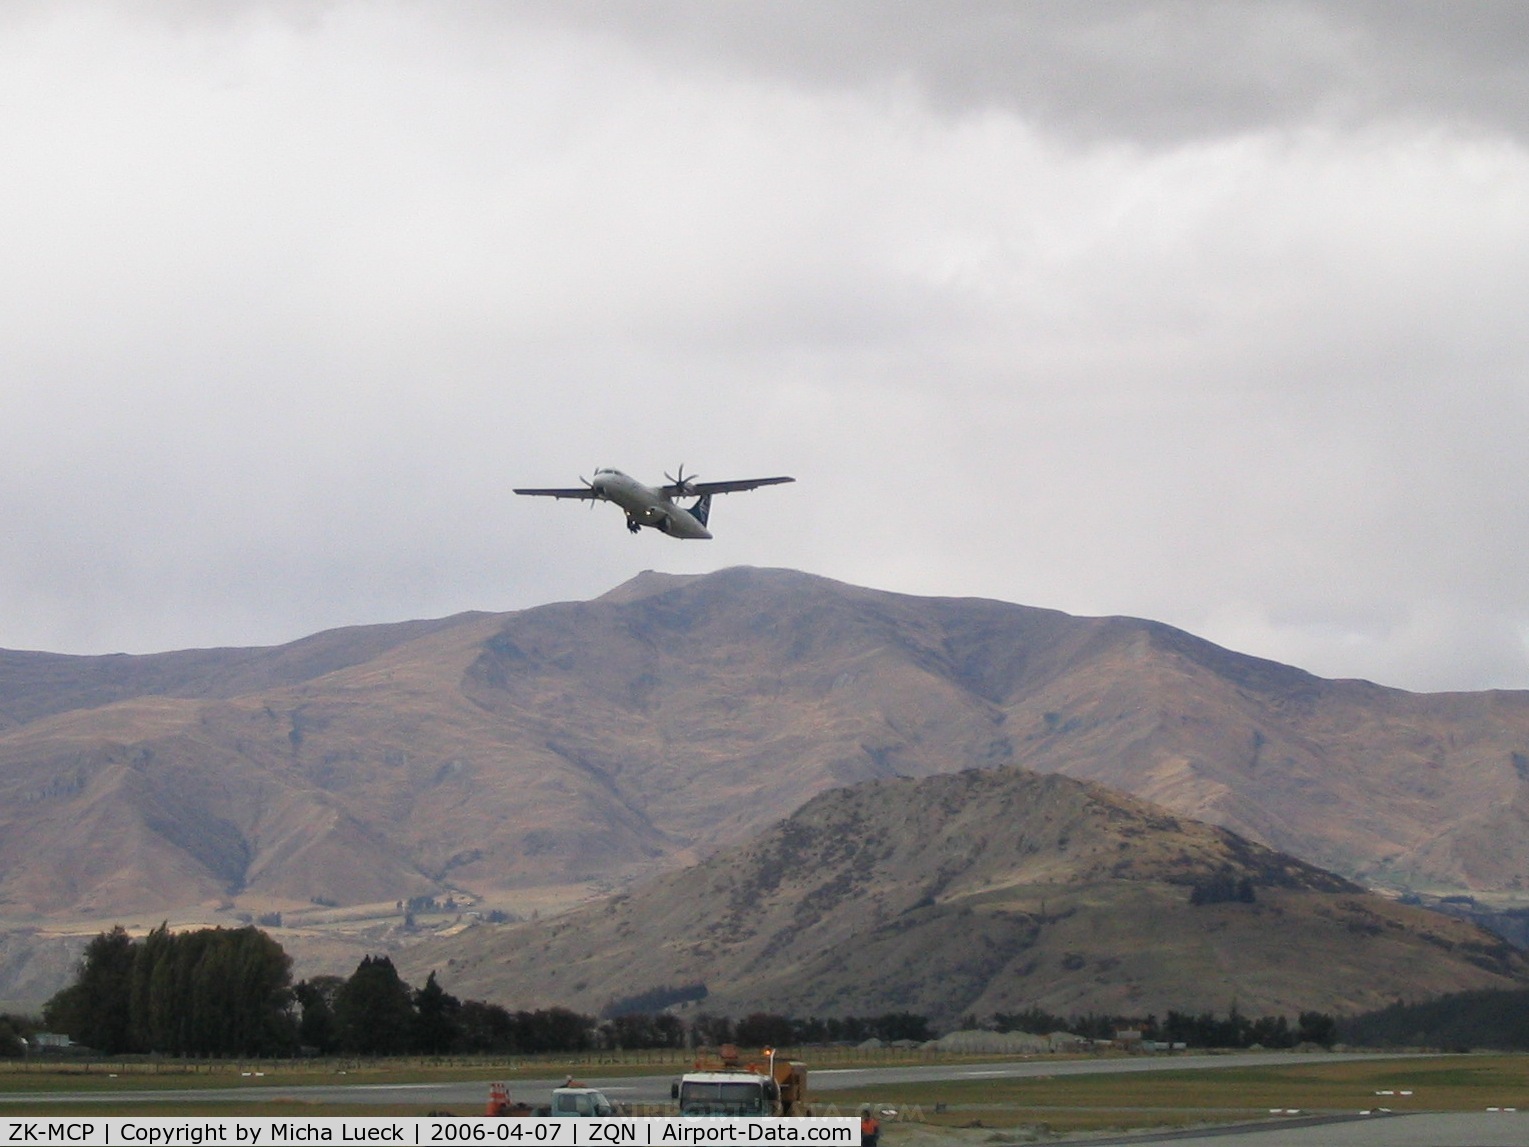 ZK-MCP, 2000 ATR 72-212A C/N 630, ATR 72-500 of Mount Cook Airlines (Air New Zealand Link) climbing out of Queenstown